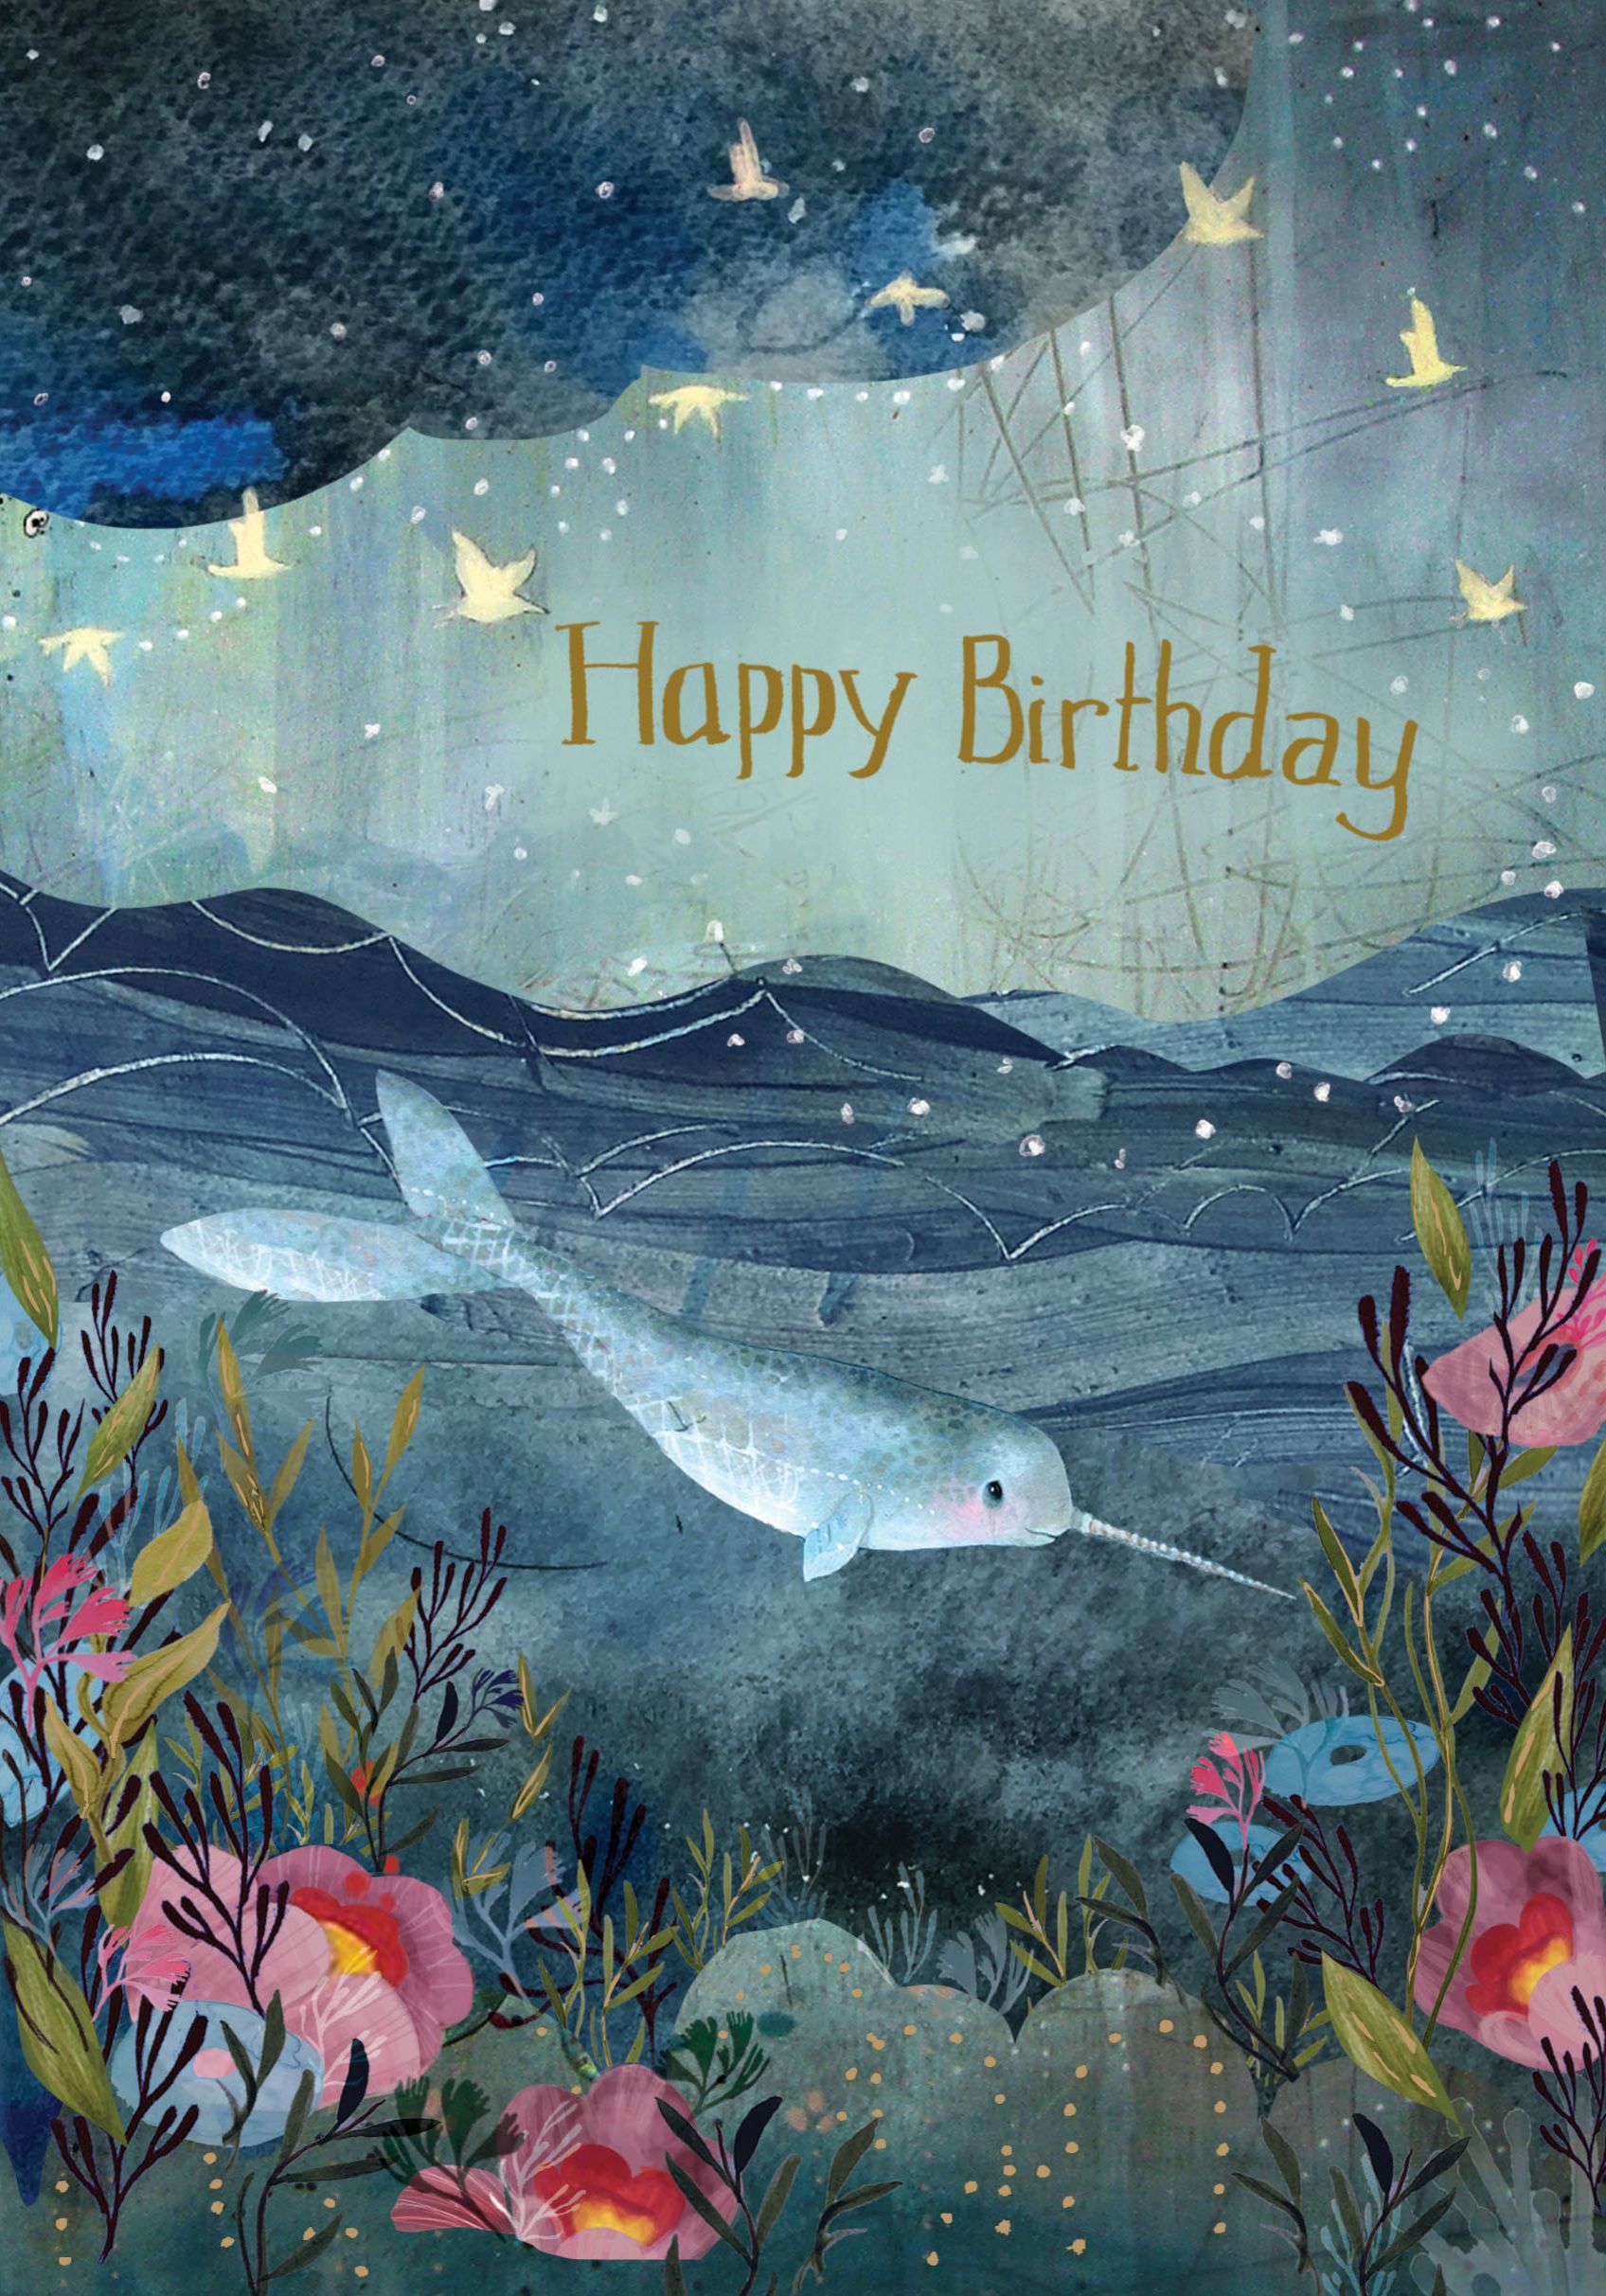 Above: Dreamlike illustrations from Kendra Binney can be discovered on Roger la Borde’s card designs.